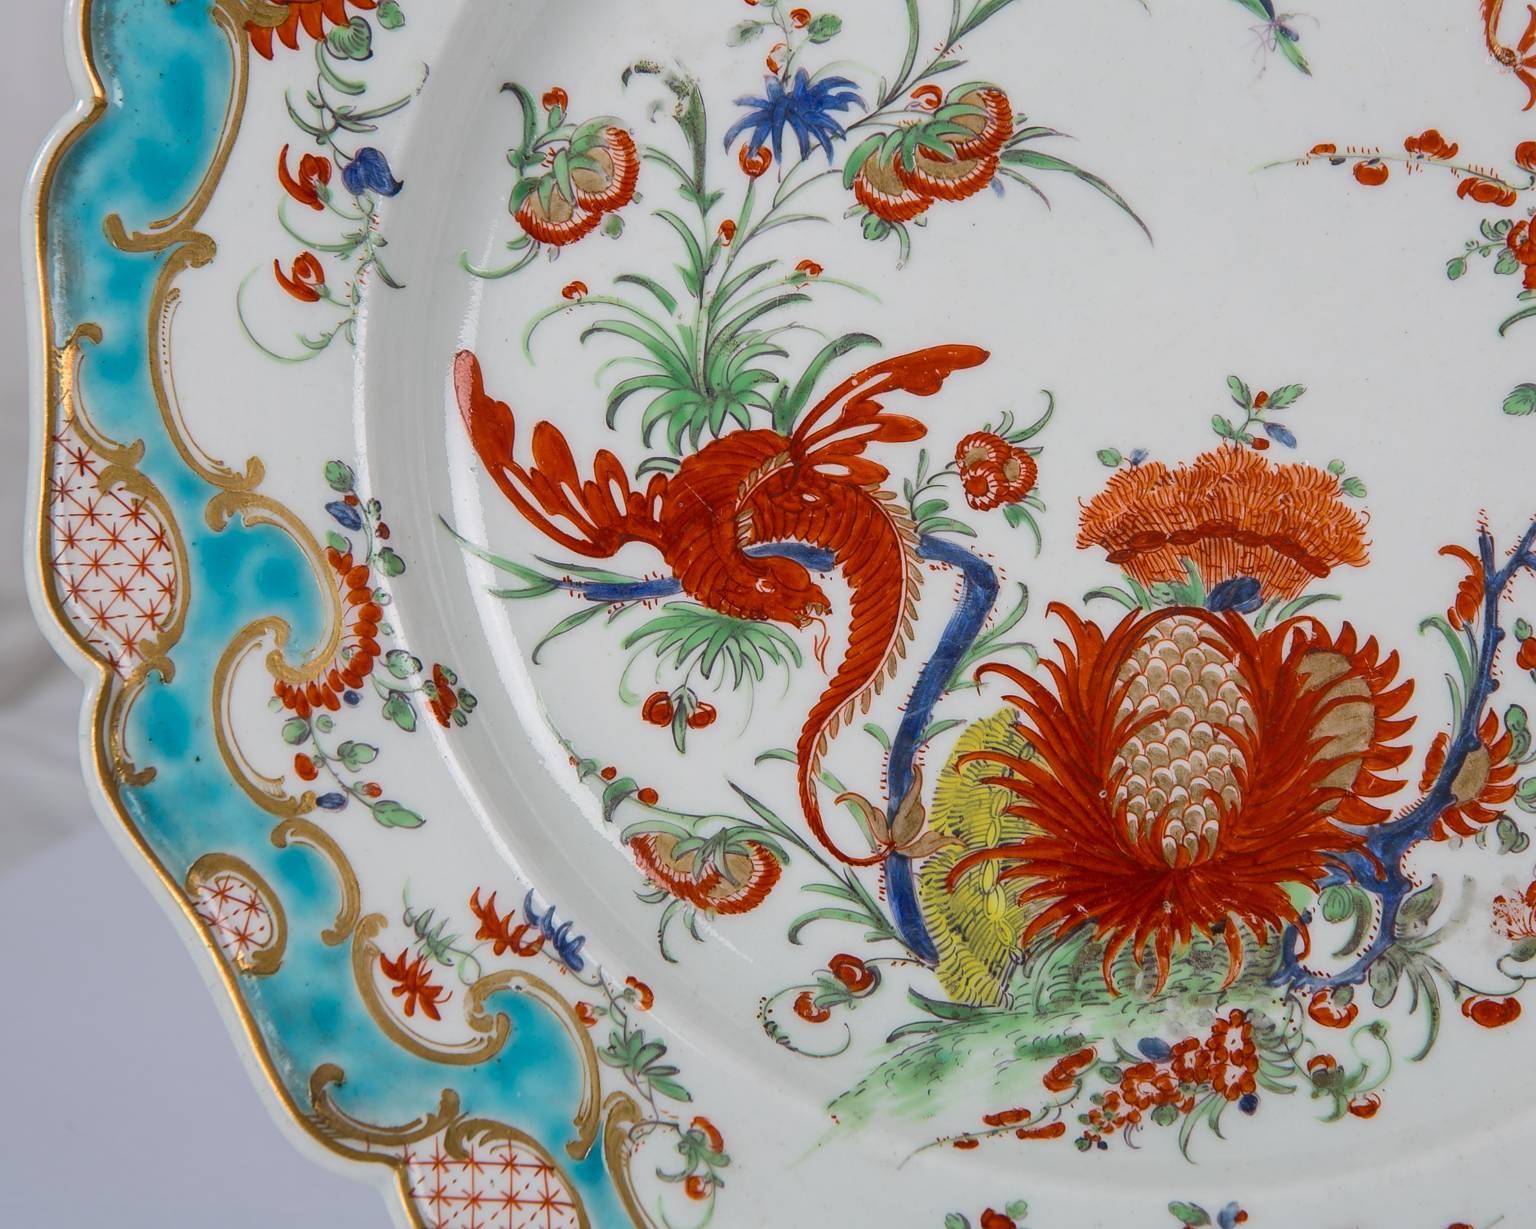 The rare Jabberwocky pattern was created by Worcester Porcelain in the 18th century. This pair, made circa 1765, are hand-painted in turquoise, and iron-red, with accents of blue and green. The dishes show two exotic dragons in flight, flowering